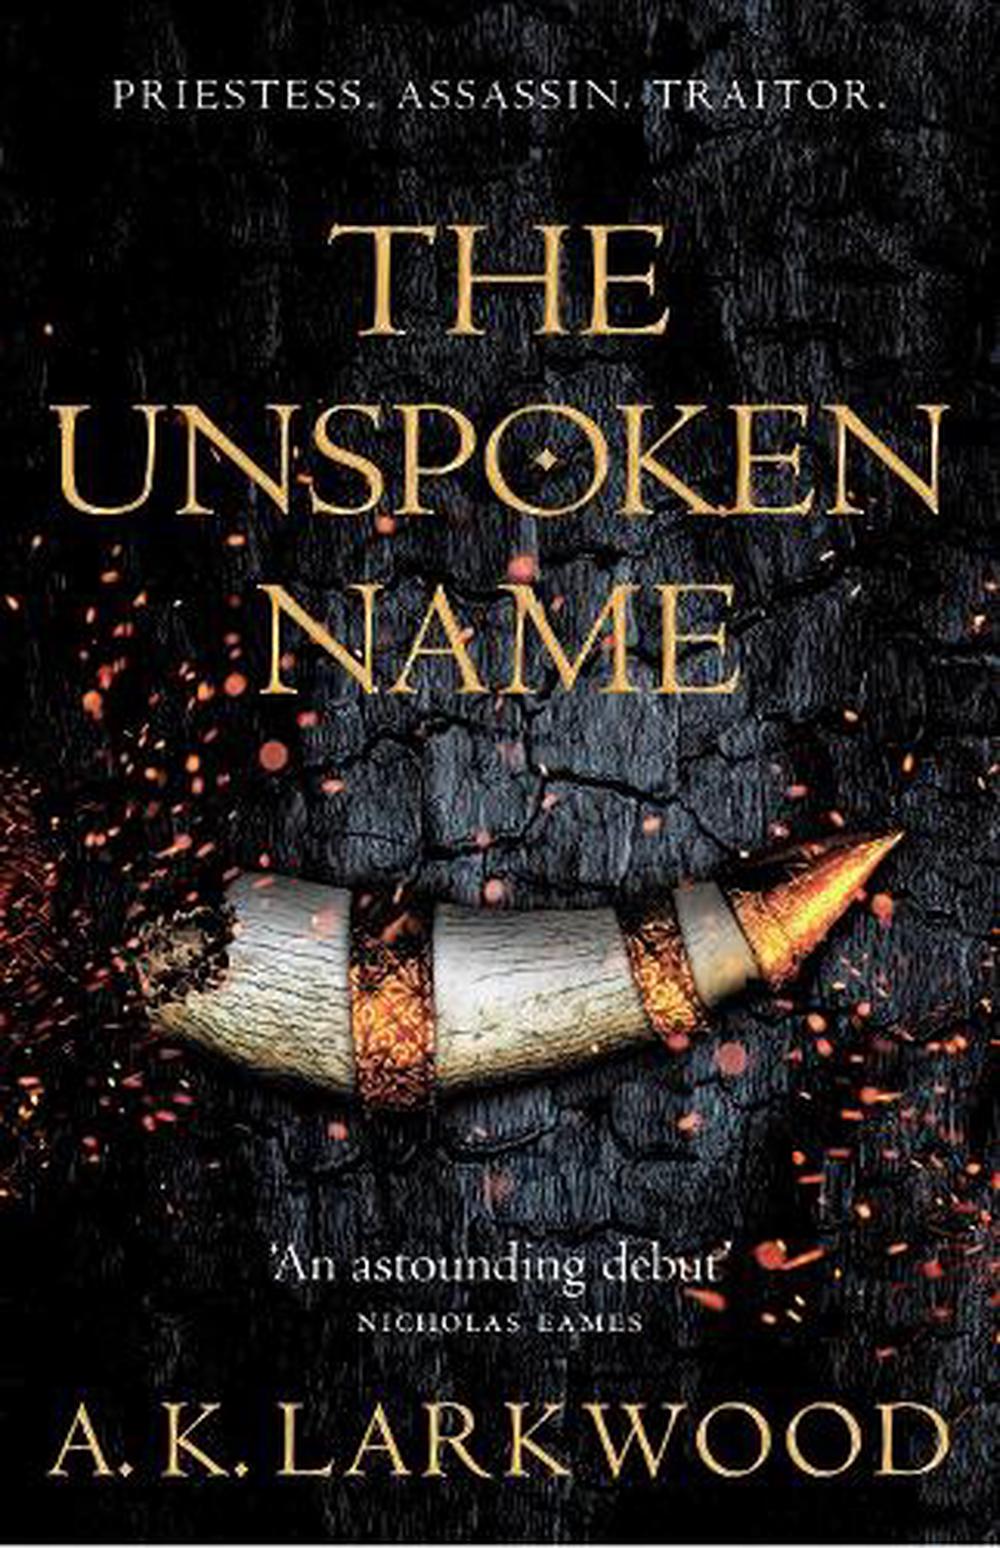 the unspoken name book 2